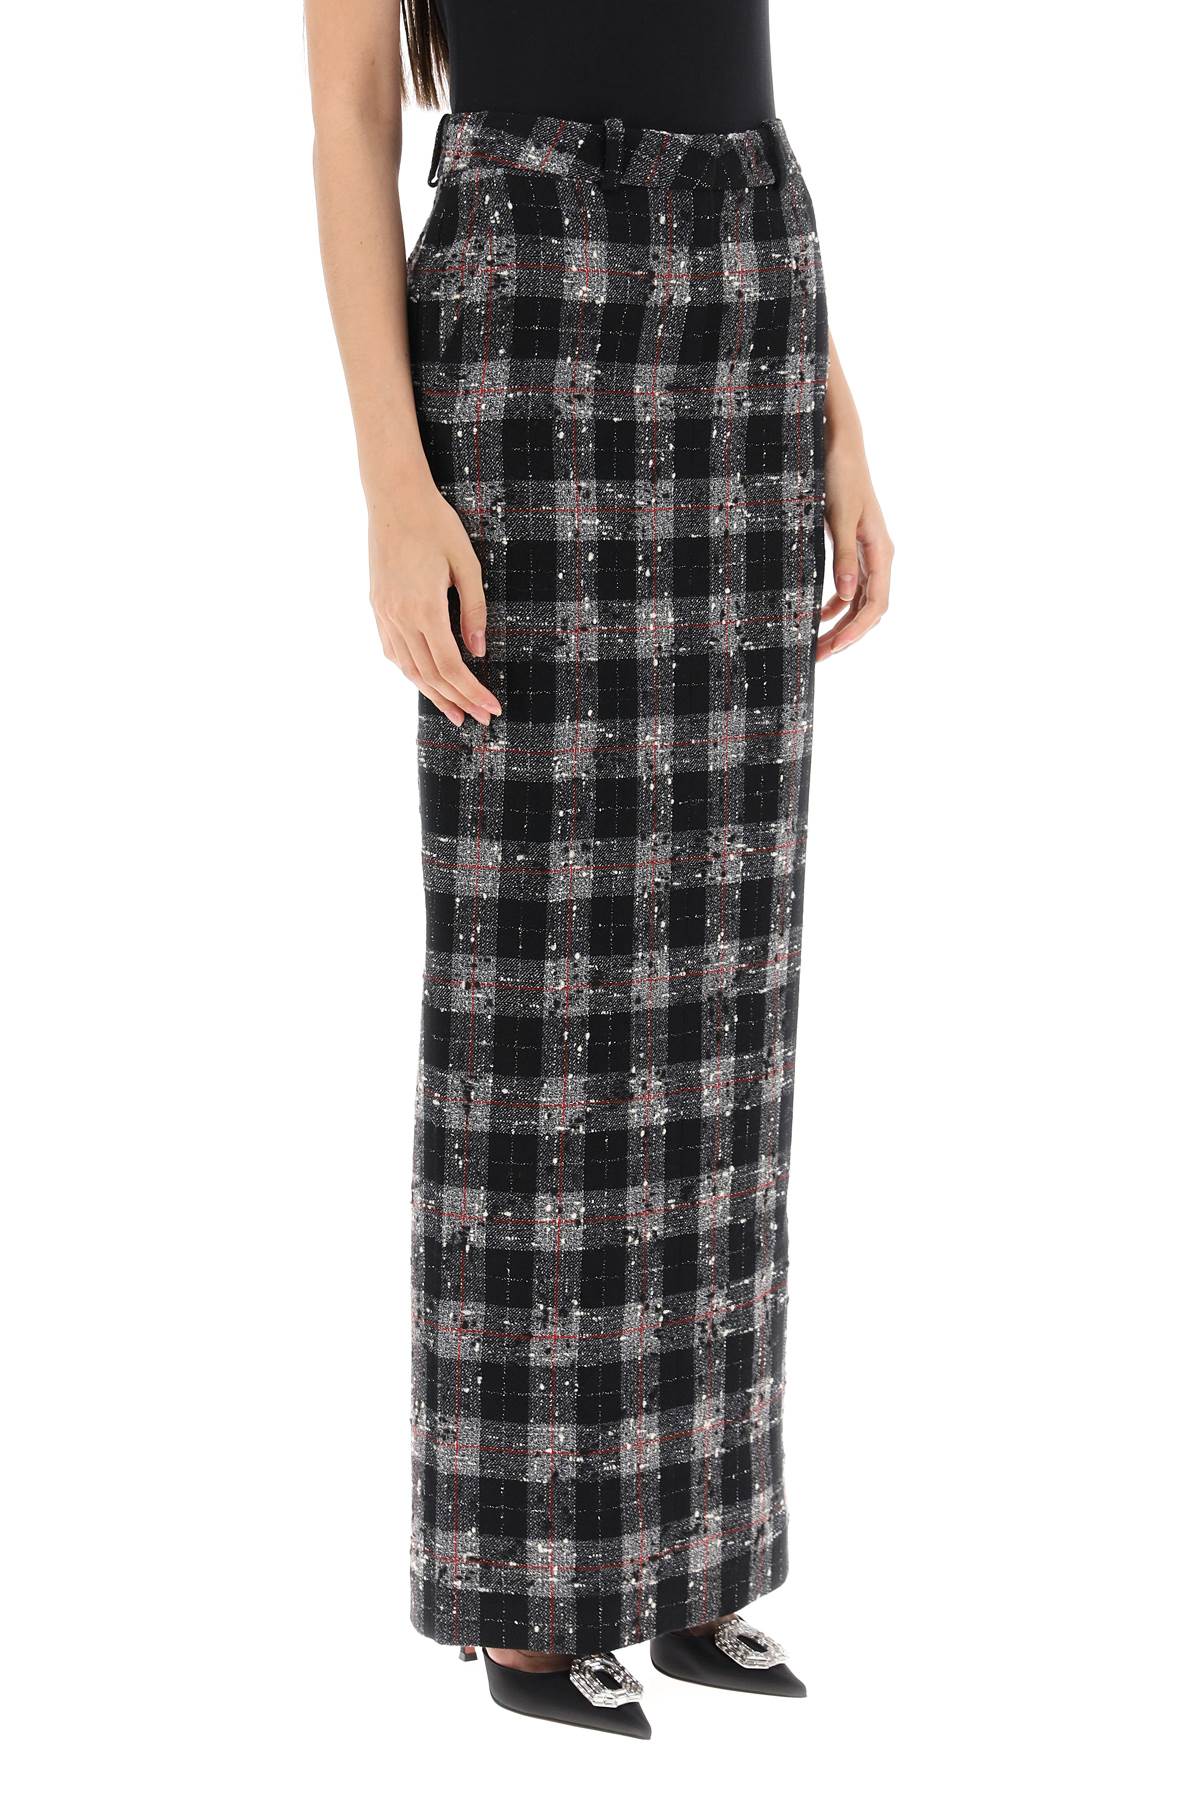 Alessandra rich maxi skirt in boucle' fabric with check motif-1